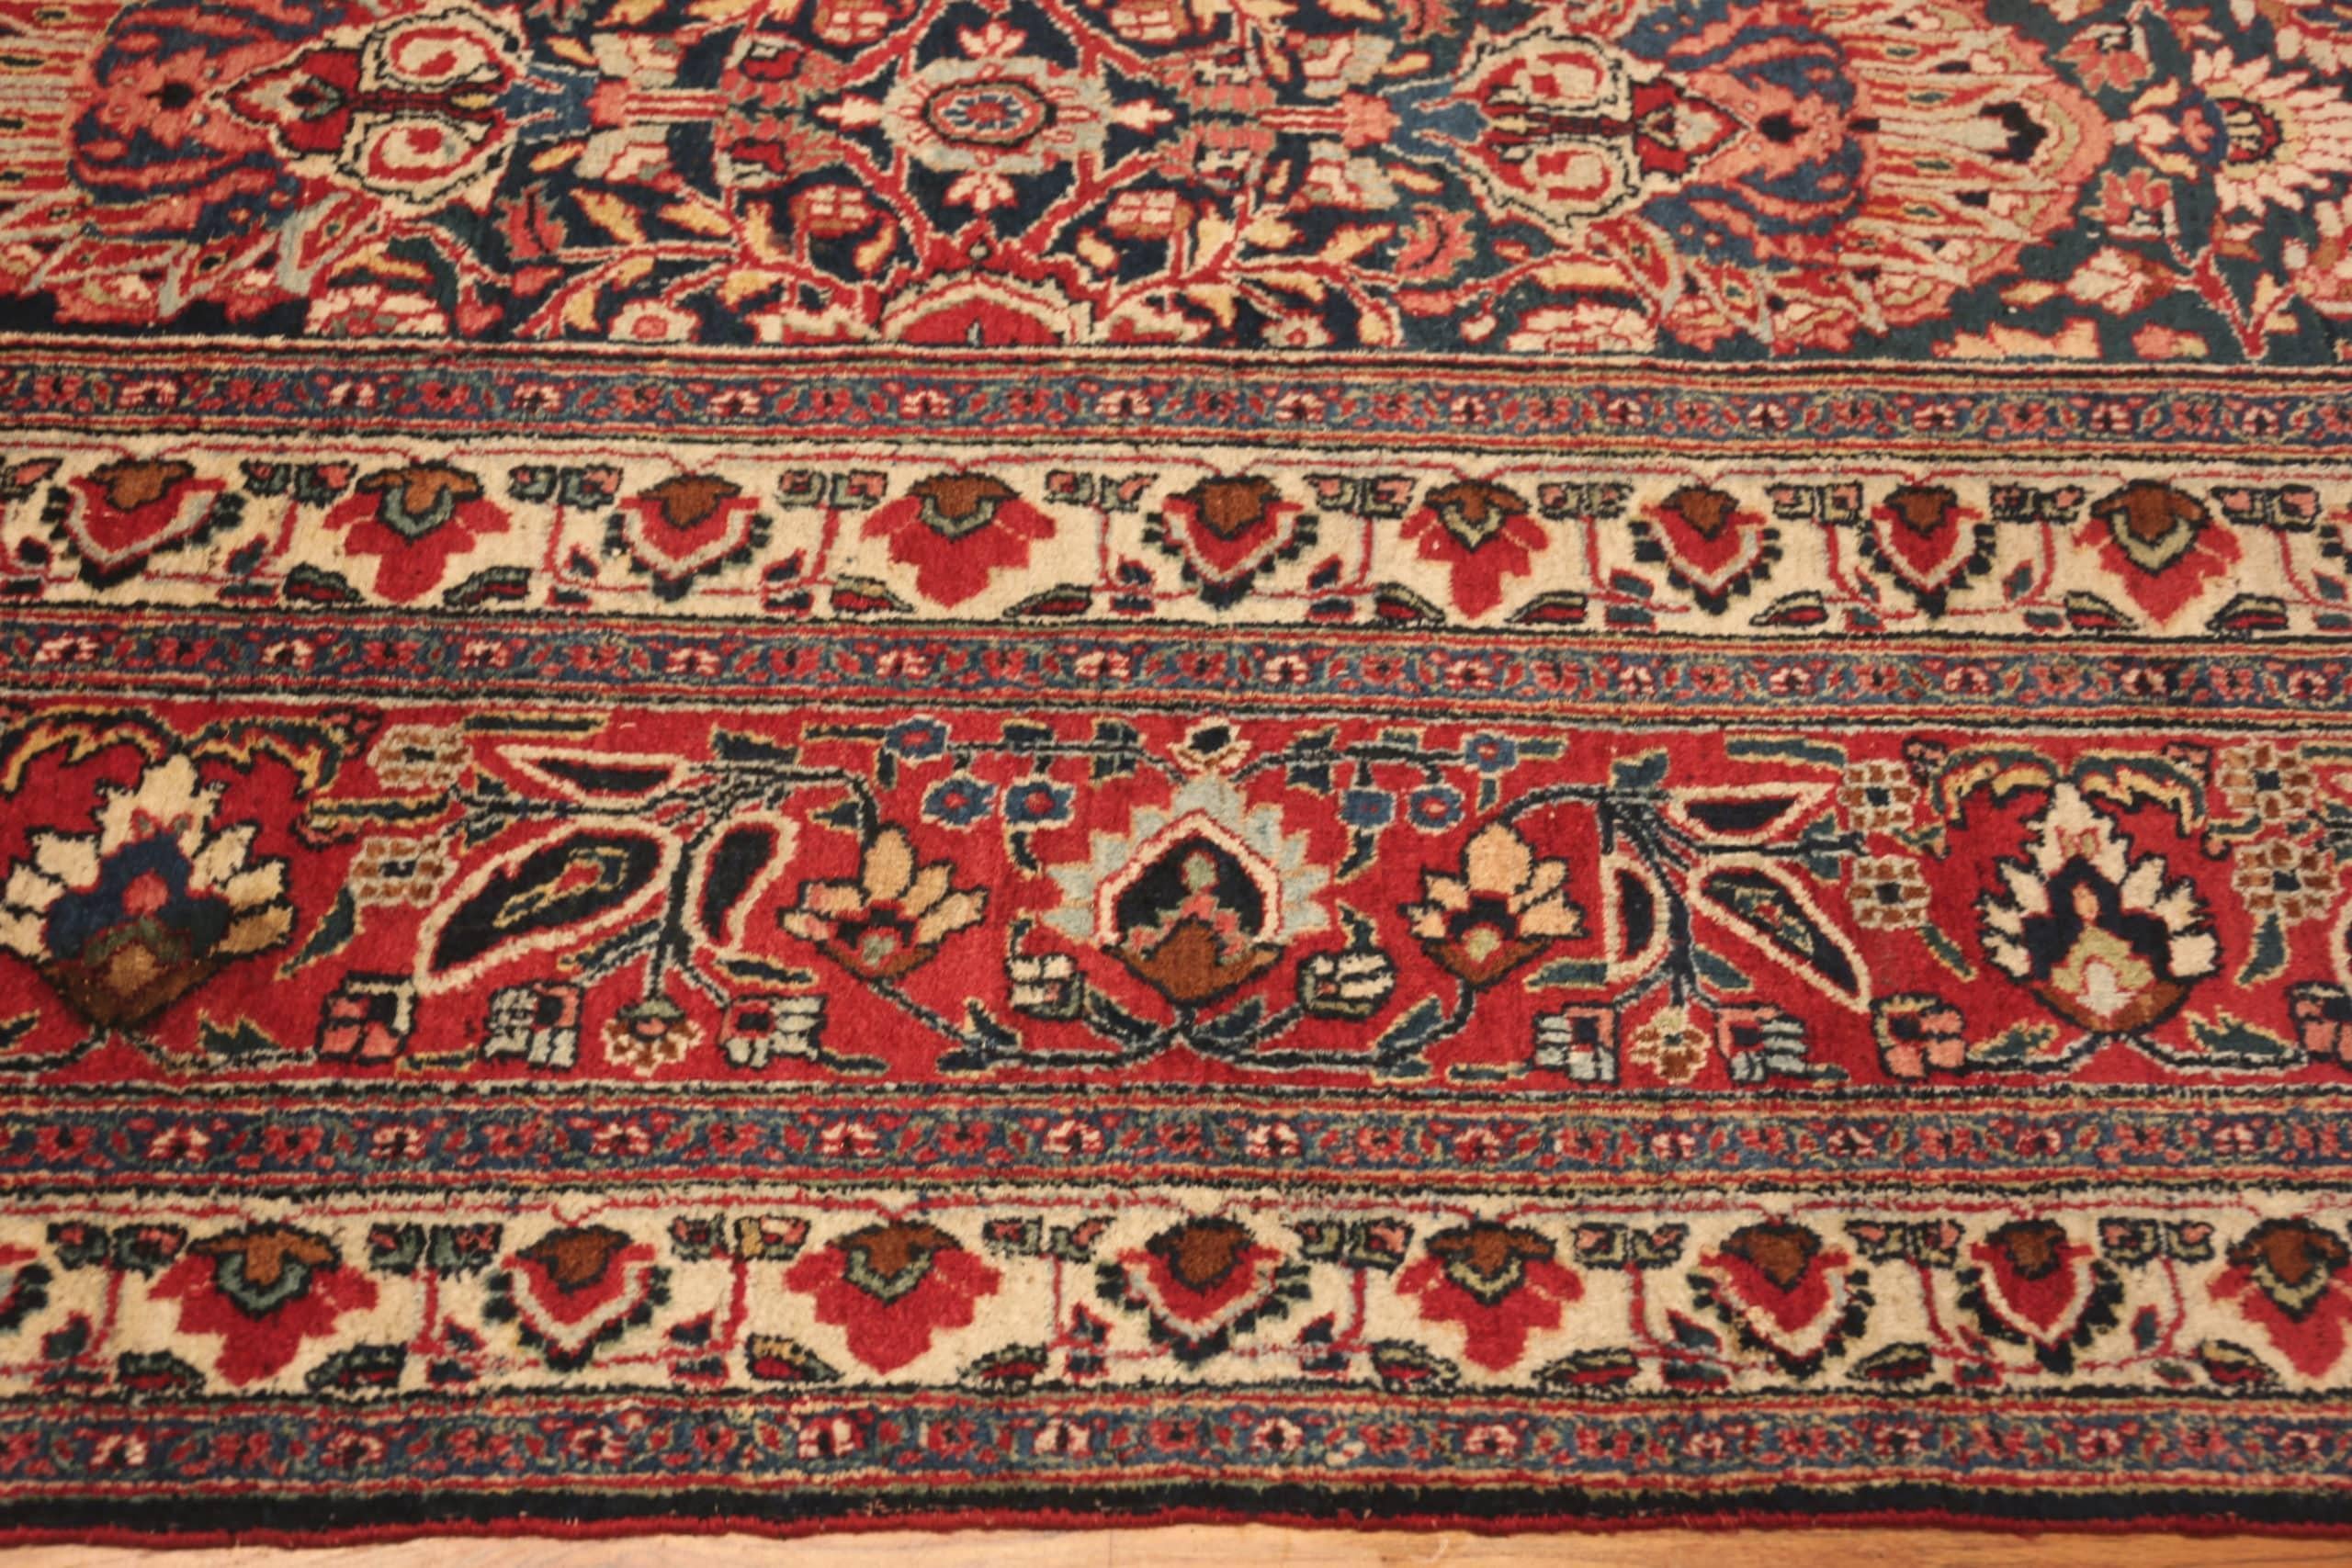 Large Antique Persian Khorassan Rug, Country of origin, Persia, Circa date: 1920. Size: 11 ft 10 in x 17 ft (3.61 m x 5.18 m)
 